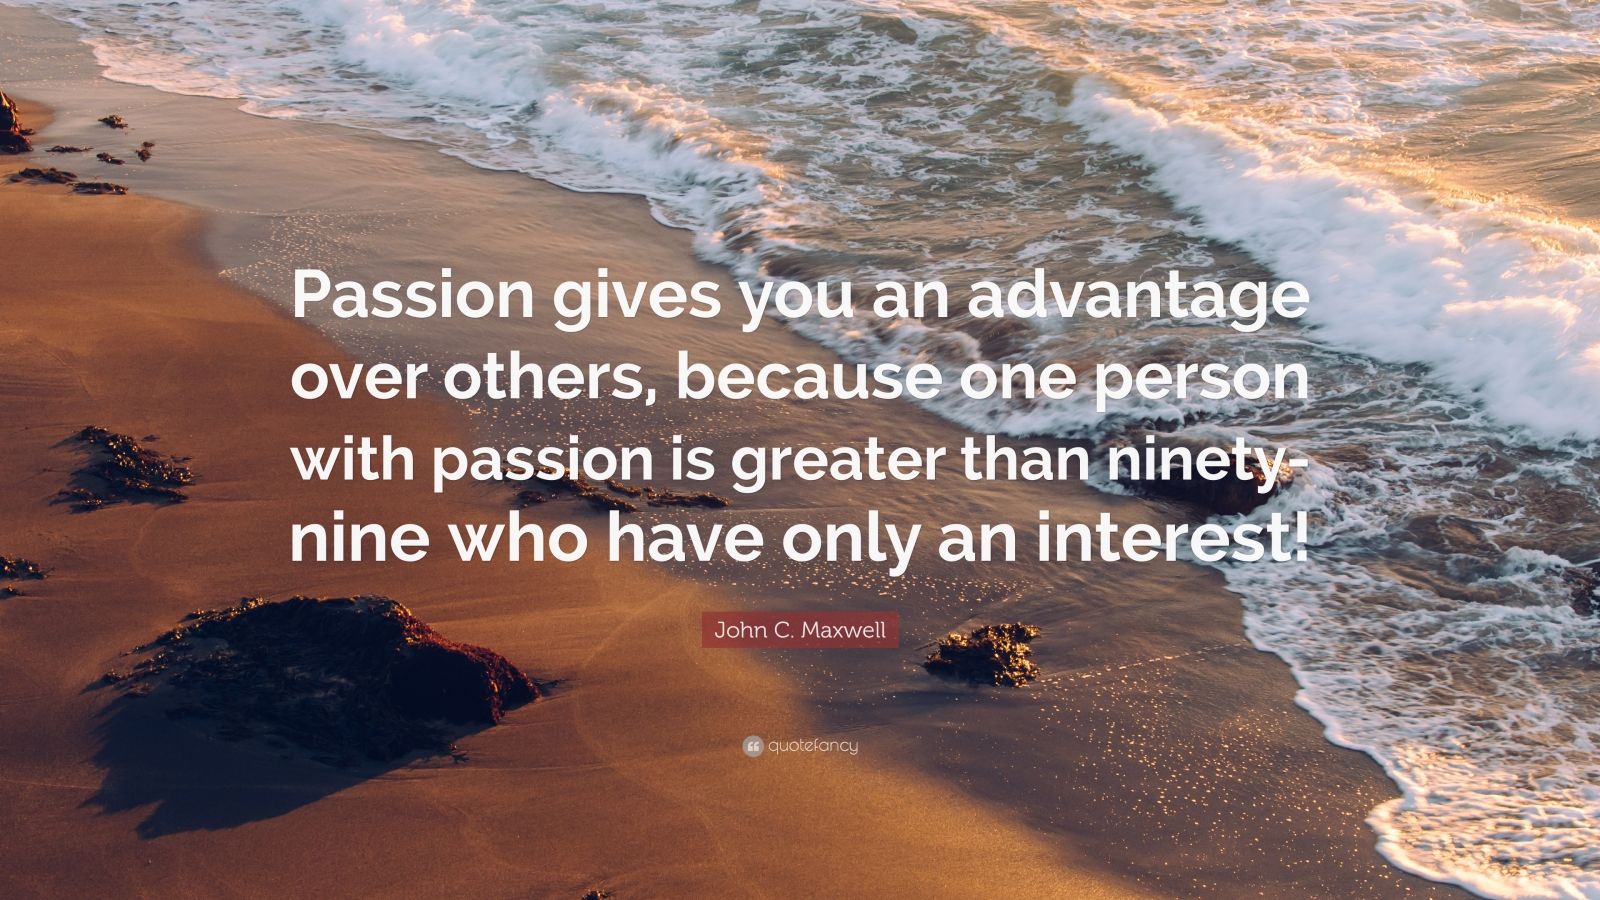 John C Maxwell Quote “passion Gives You An Advantage Over Others